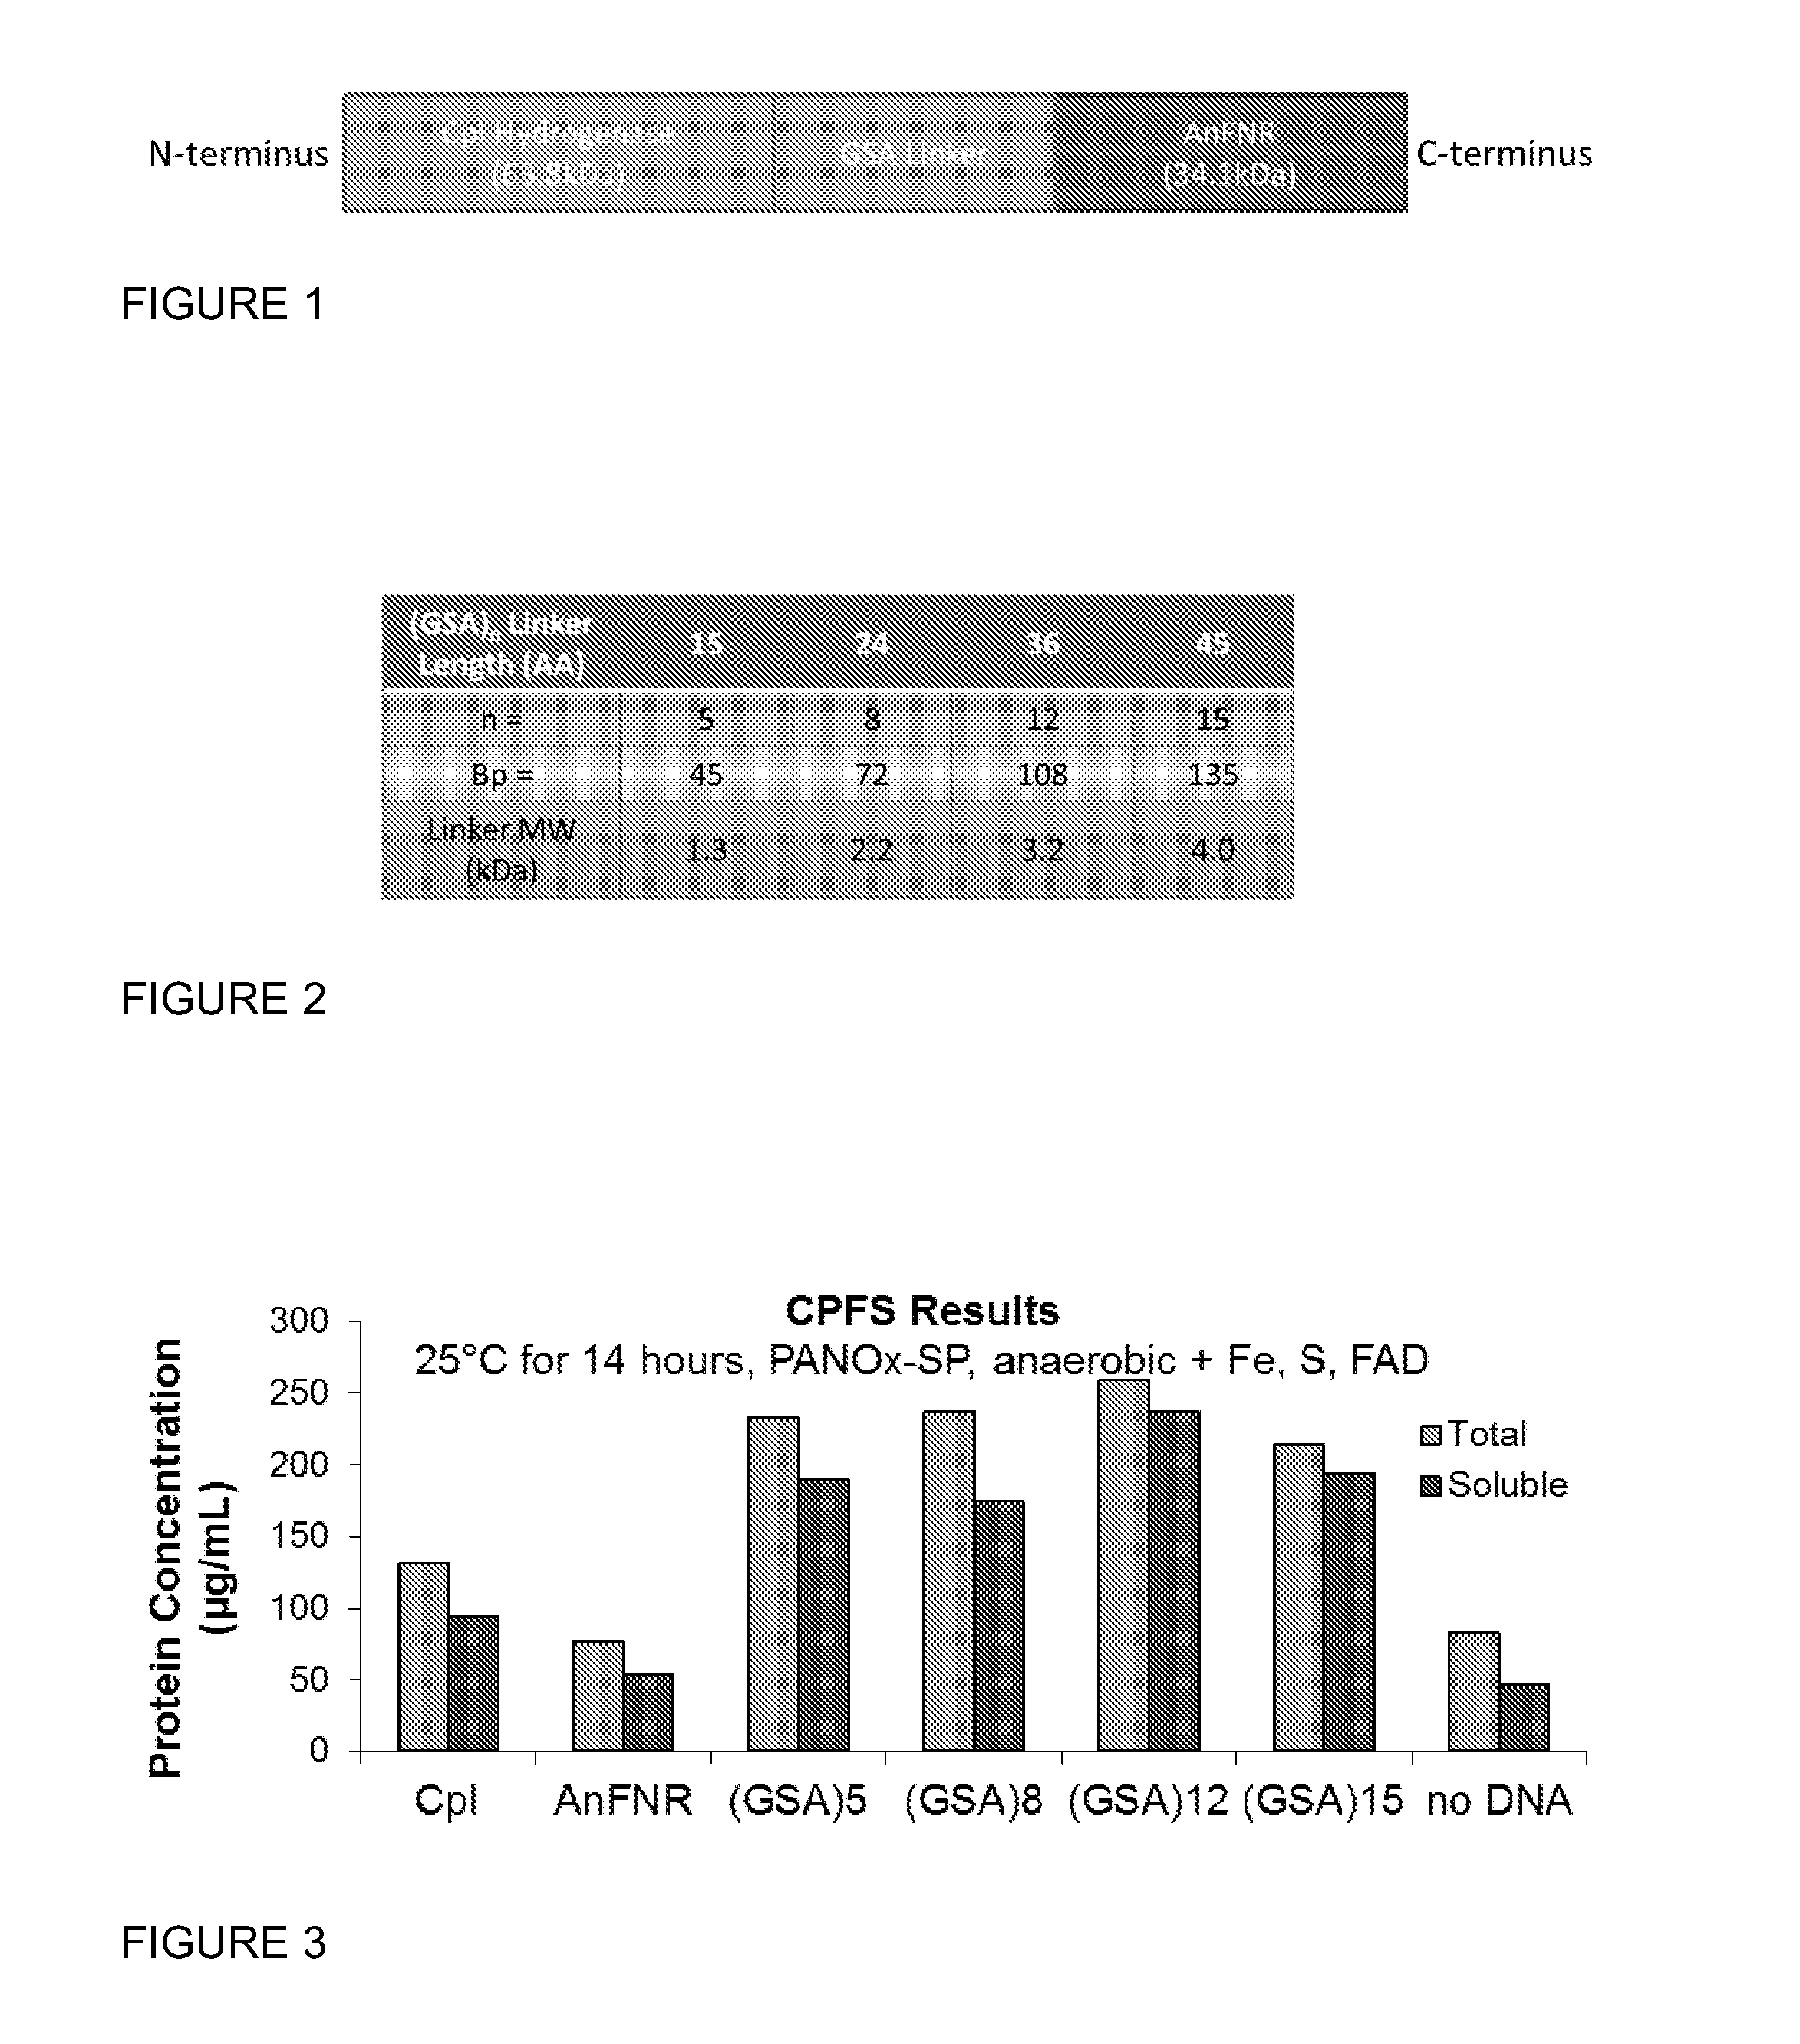 Hydrogenase Fusion Protein for Improved Hydrogen Production